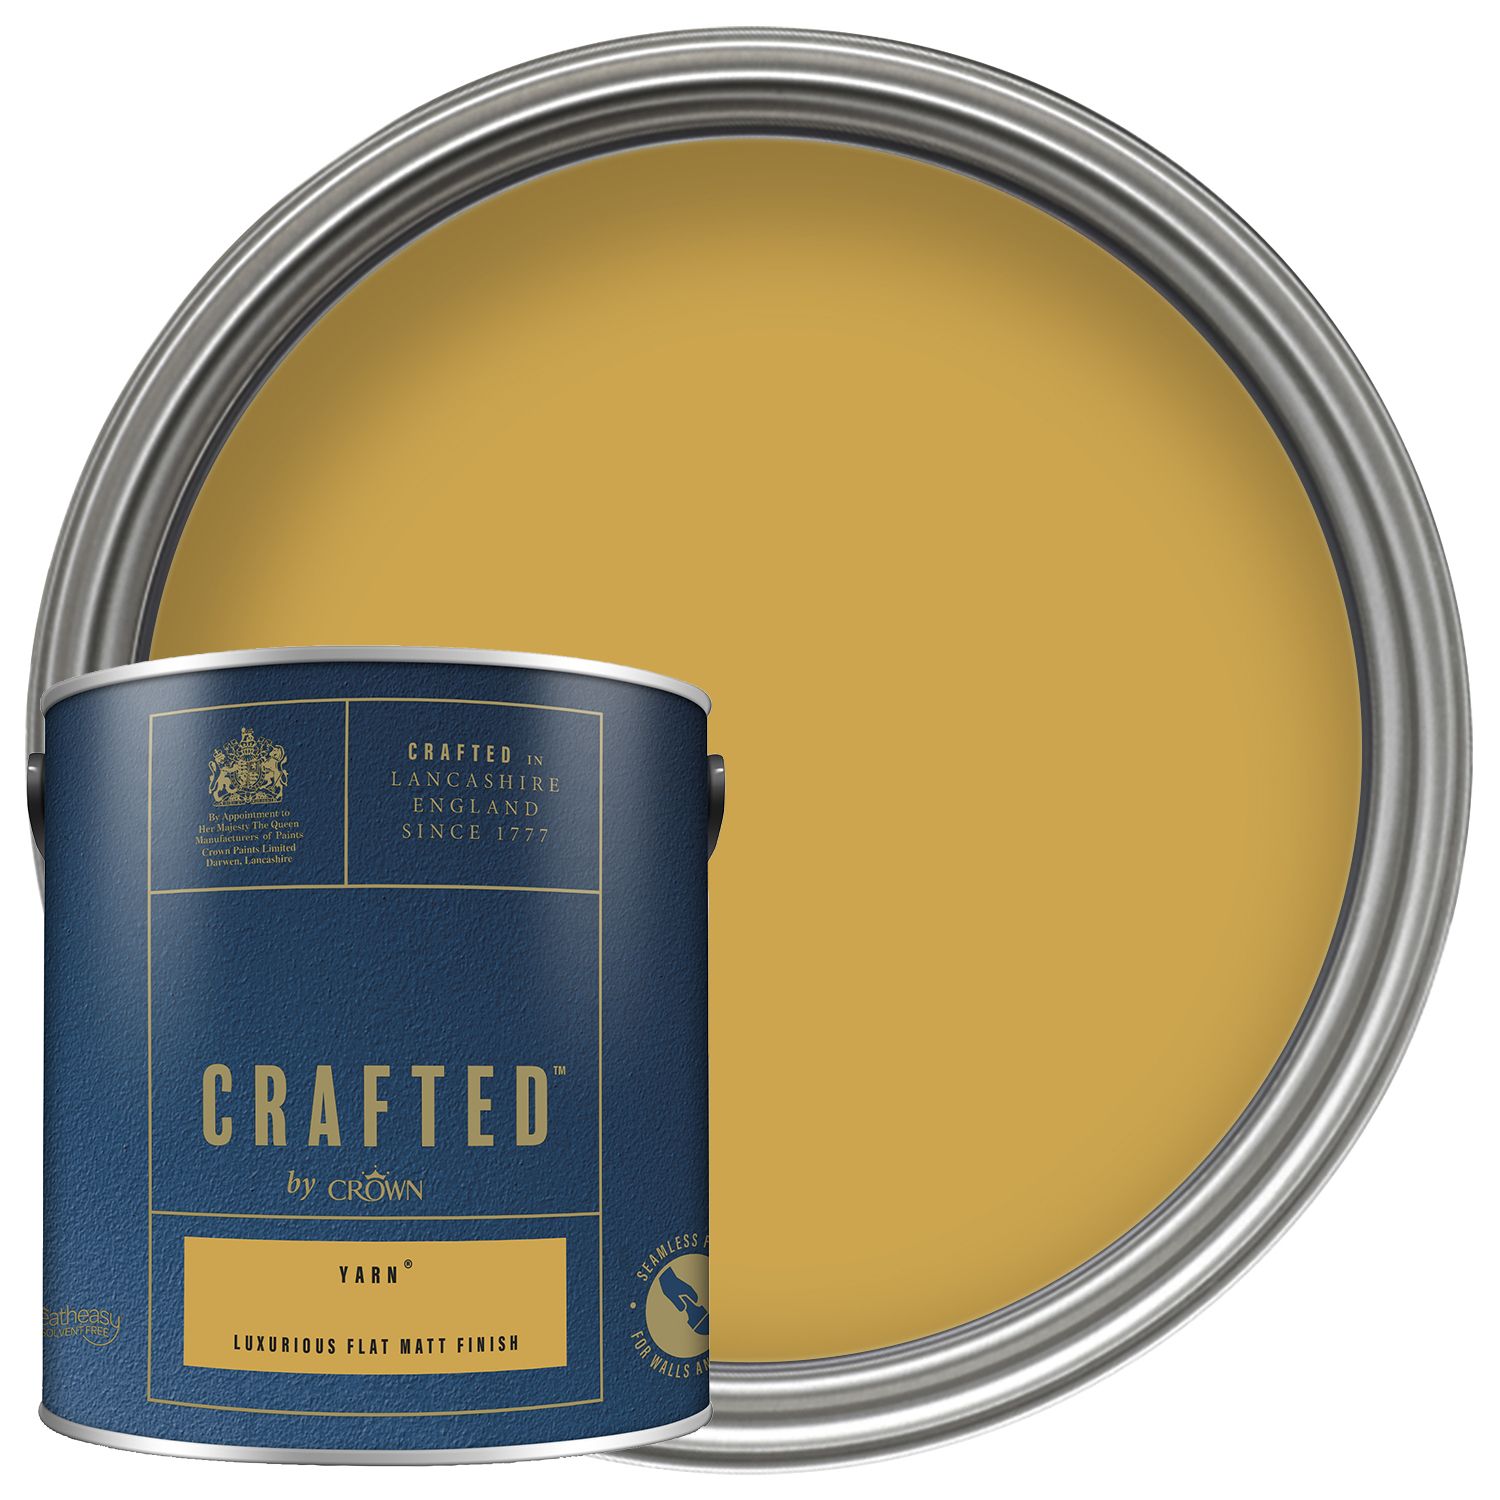 Image of CRAFTED™ by Crown Flat Matt Emulsion Interior Paint - Yarn™ - 2.5L